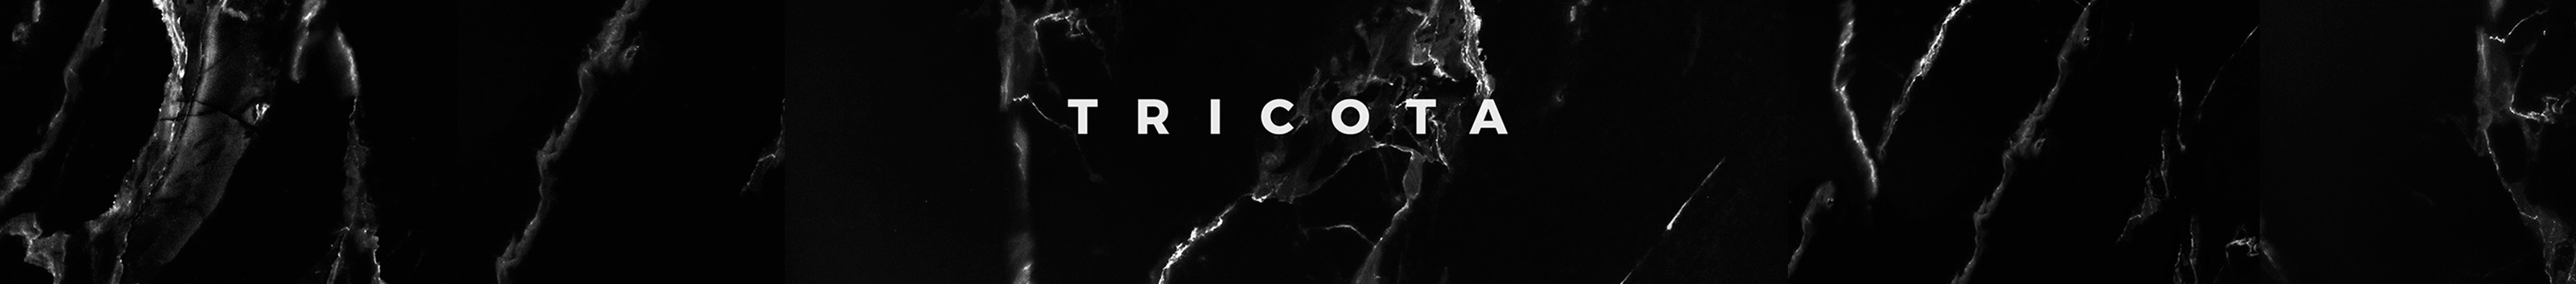 Tricota Agency's profile banner